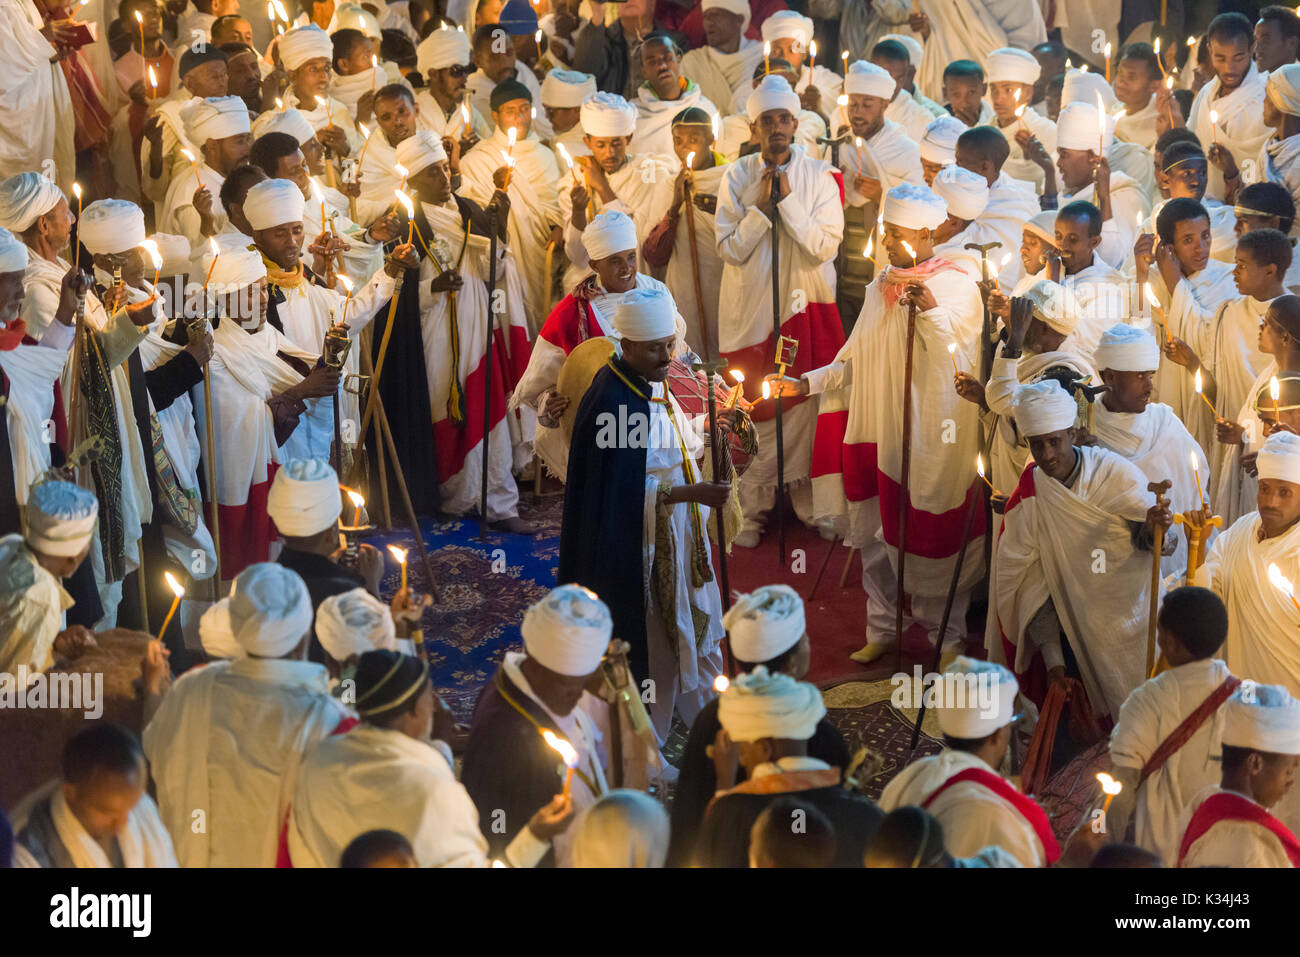 Priests chanting prayers by candlelight in the courtyard of Bet Medhane Alem church, during the prayers on Ethiopian Orthodox Easter Saturday, Lalibela, Ethiopia Stock Photo